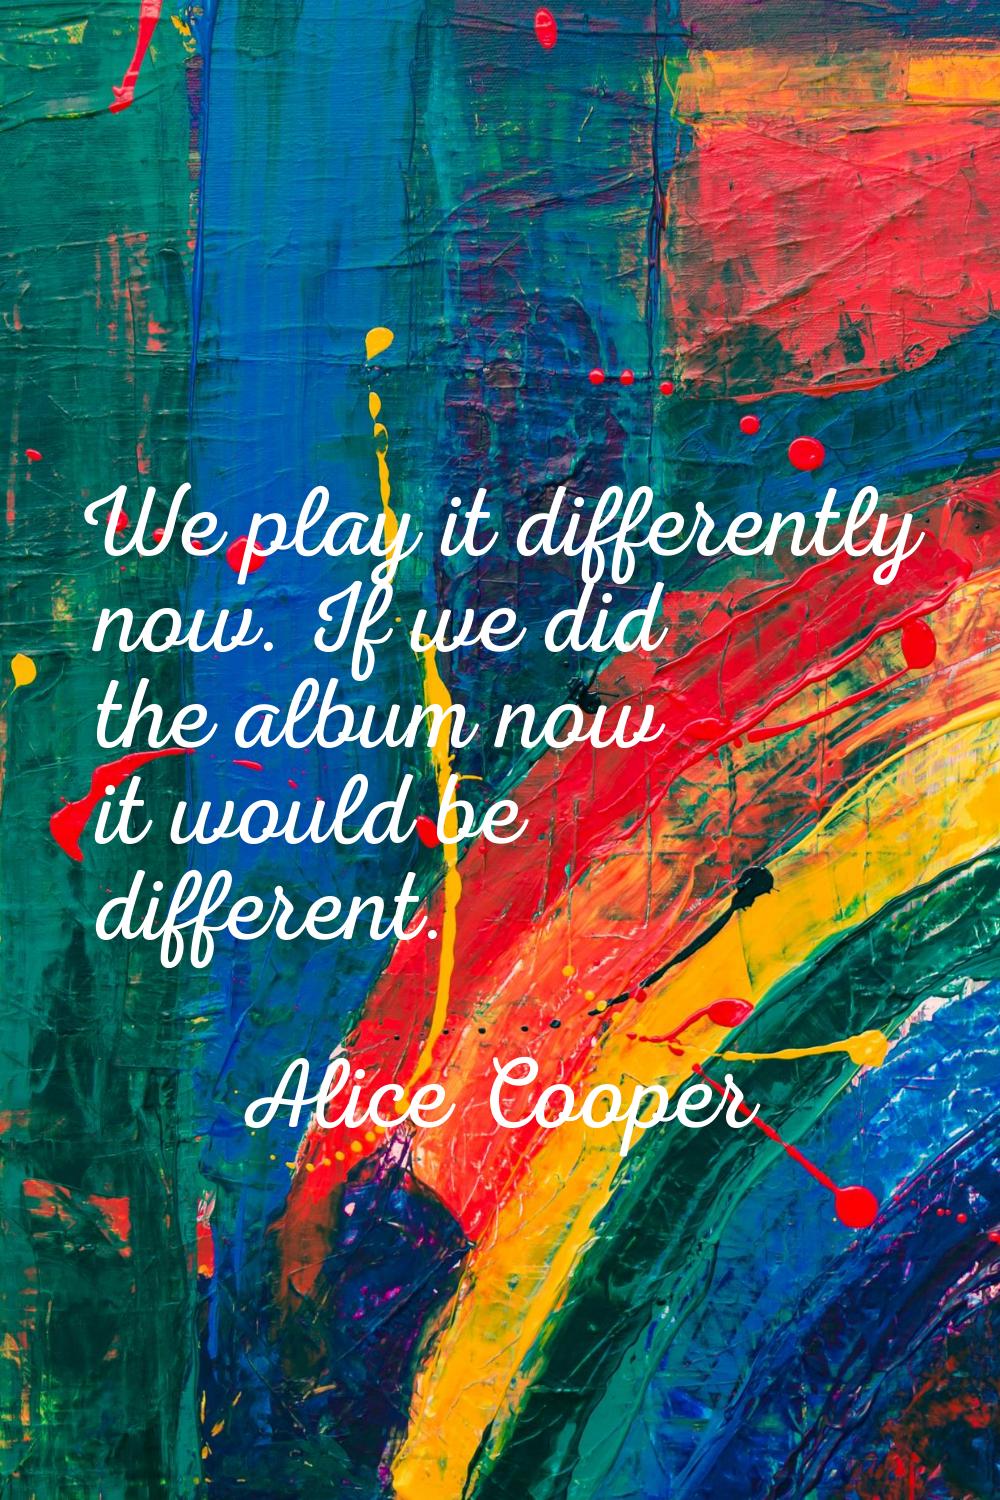 We play it differently now. If we did the album now it would be different.